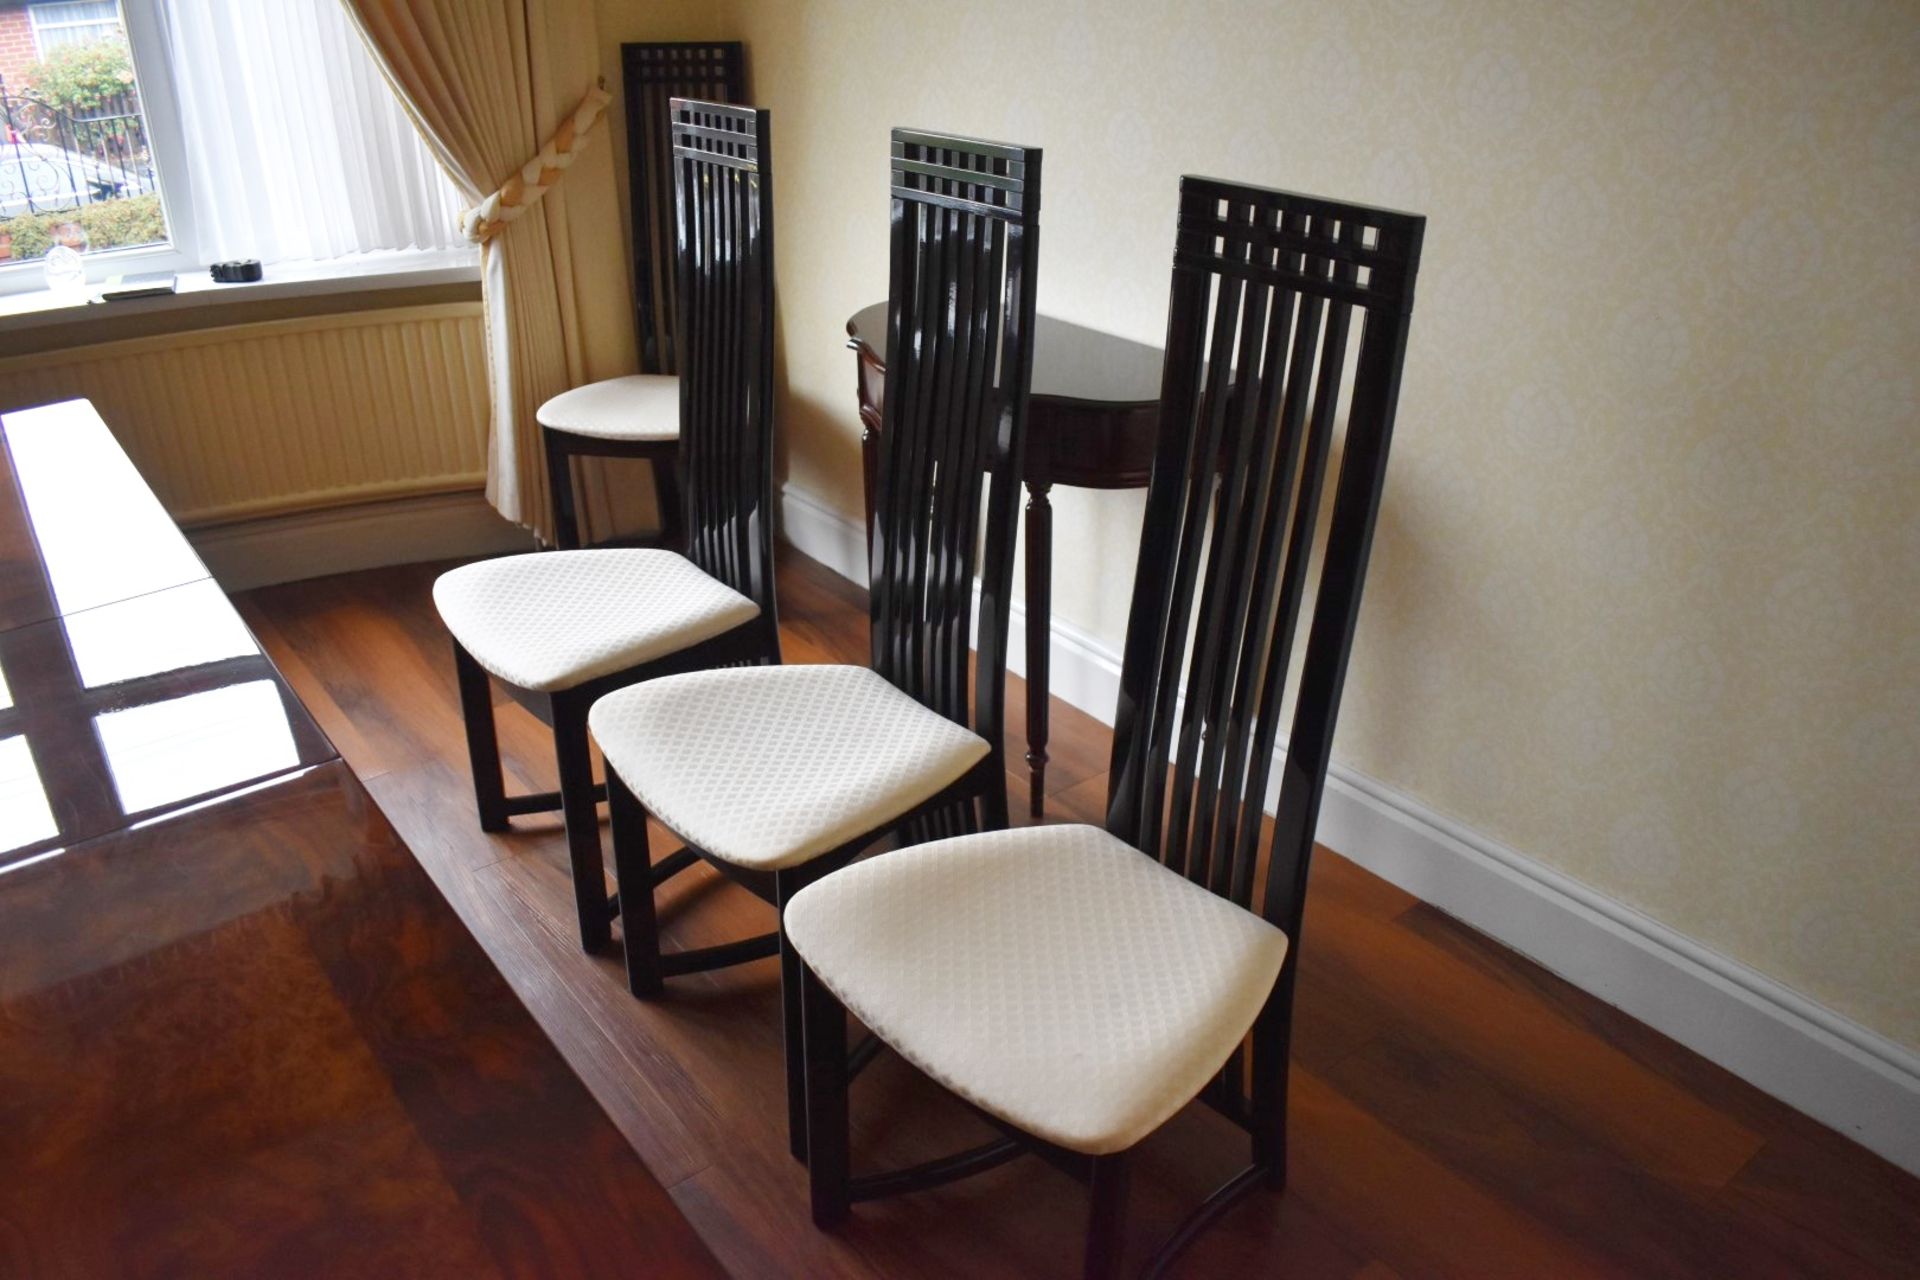 8 x High Back Dining Chairs - Set of Eight Elegant High Back Oriental Style Chairs With Black Finish